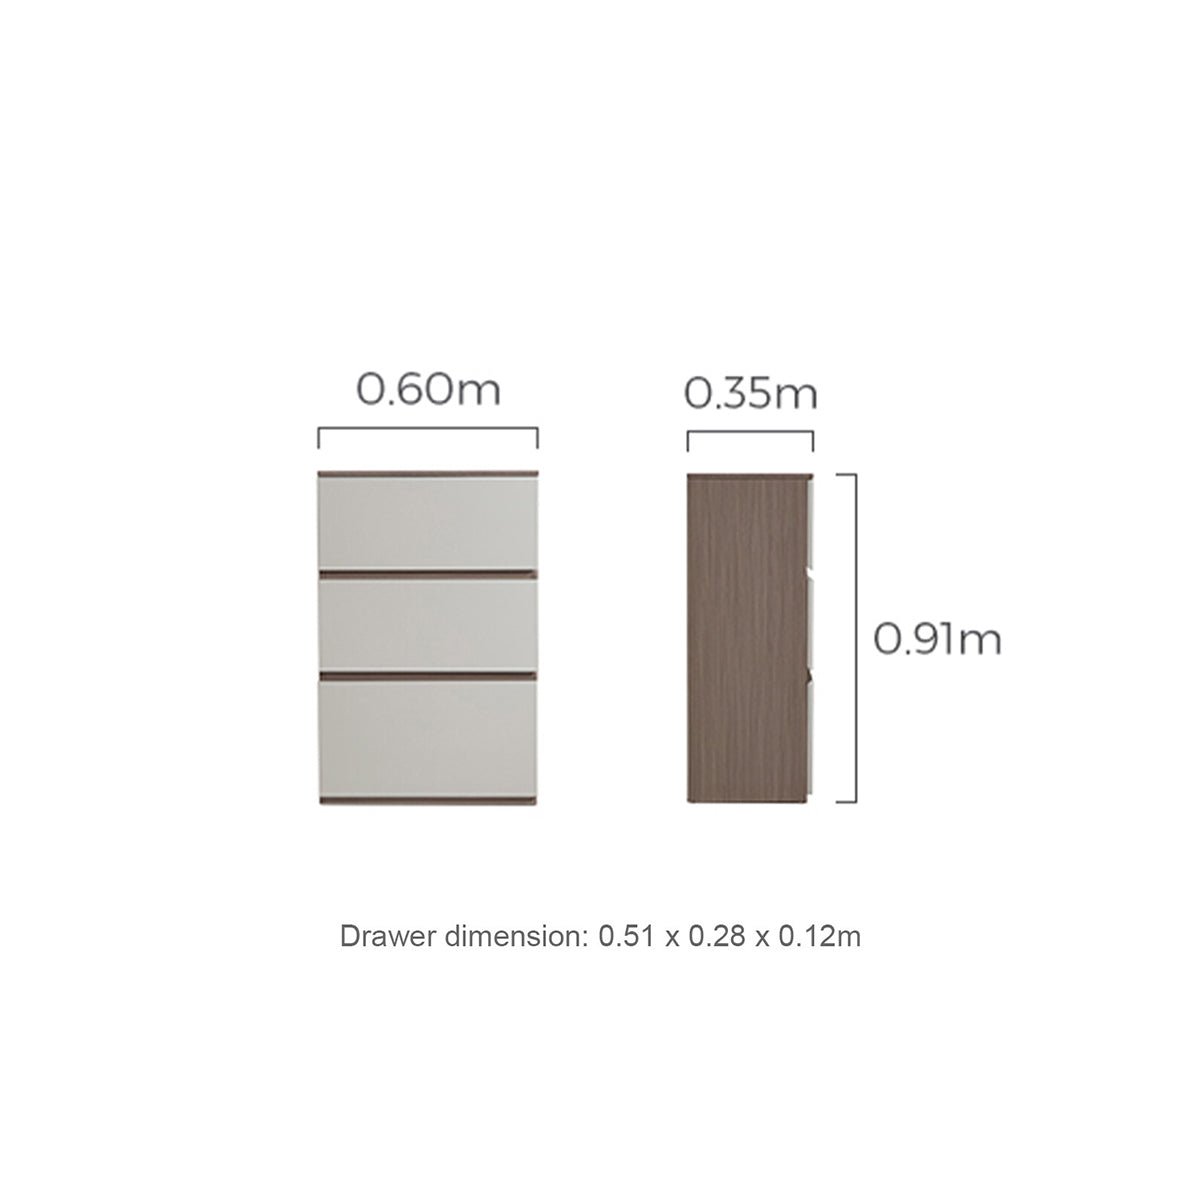 Cappuccino Taupe Chest of 3 Drawers - 0cm